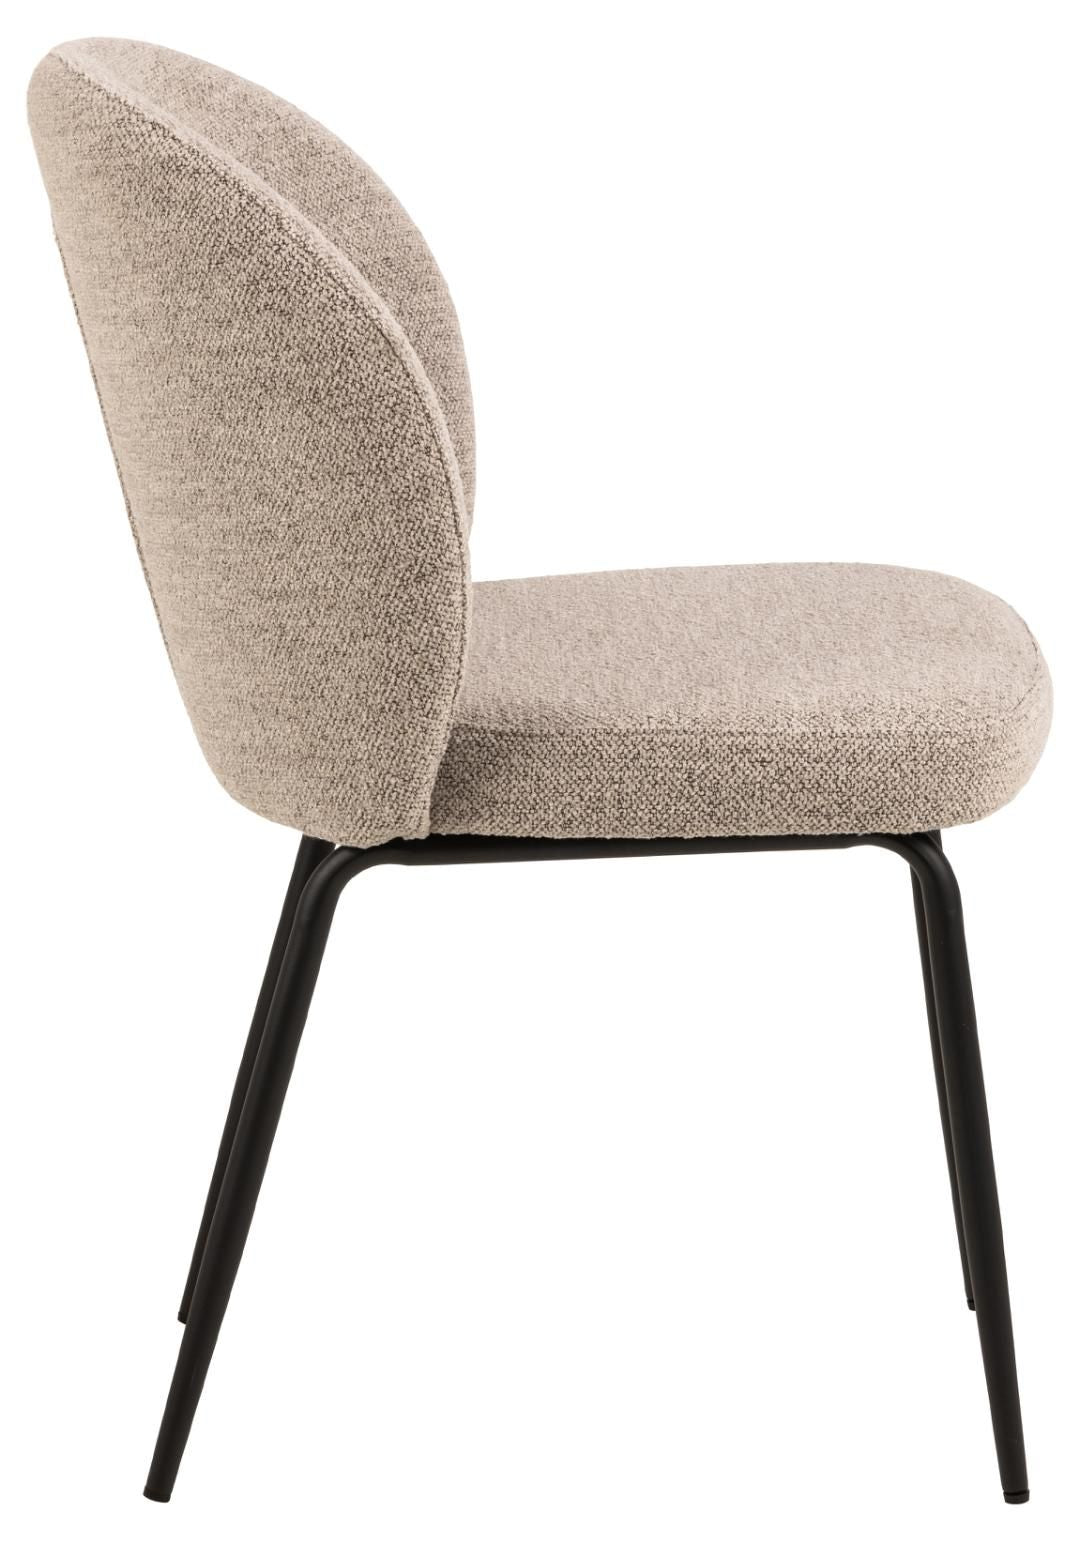 Patricia dining chair